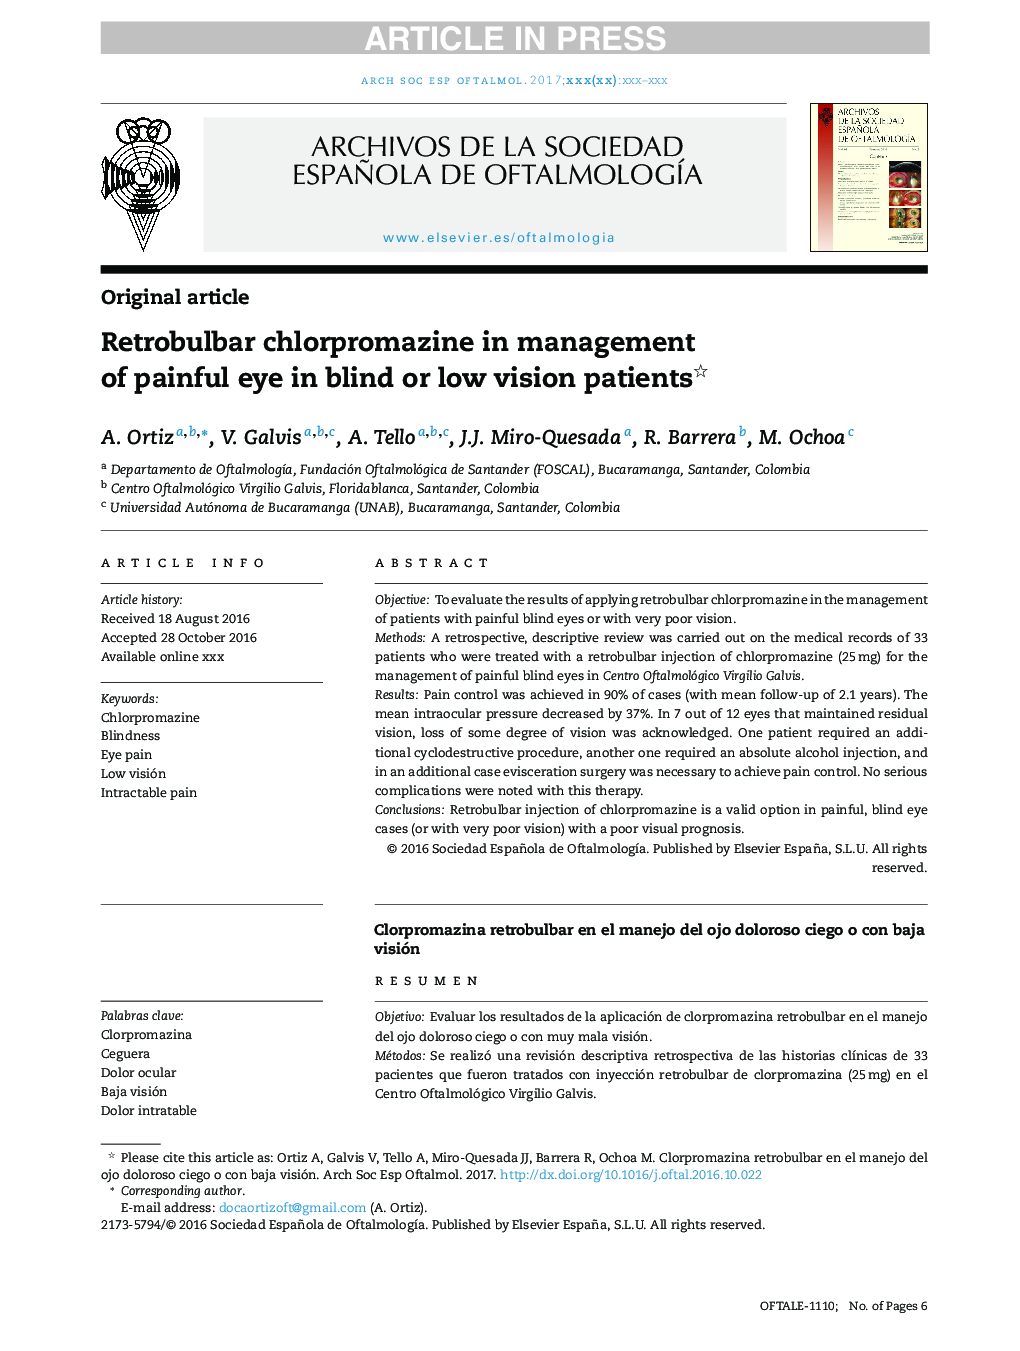 Retrobulbar chlorpromazine in management of painful eye in blind or low vision patients